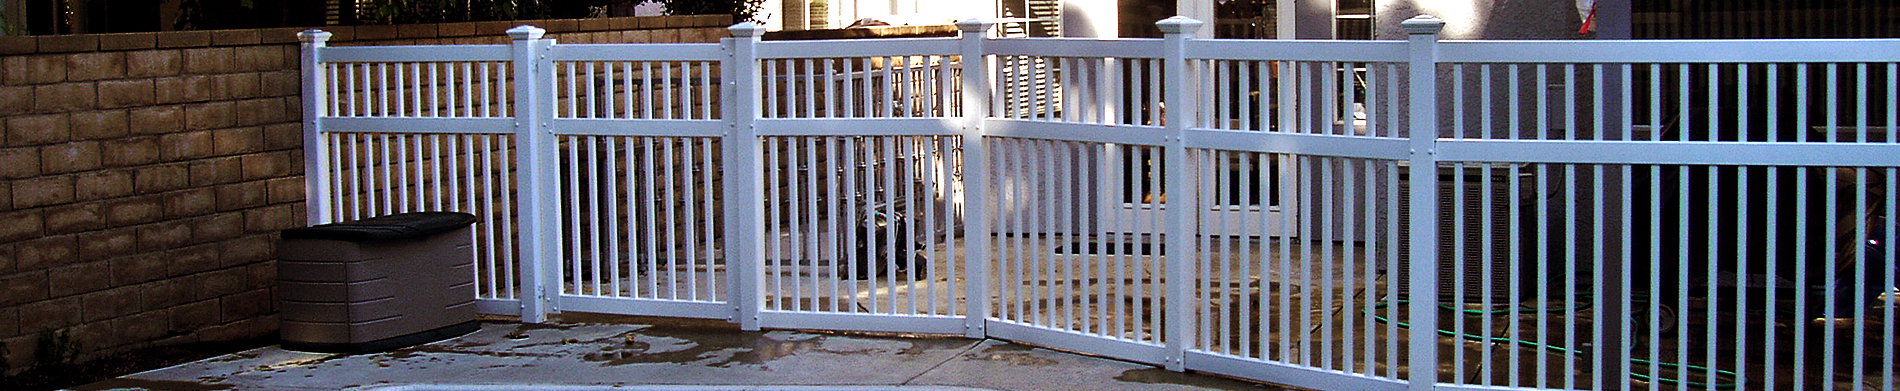 6 Advantages You Can Look At When You Buy Vinyl Pool Fencing From Duramax in The US